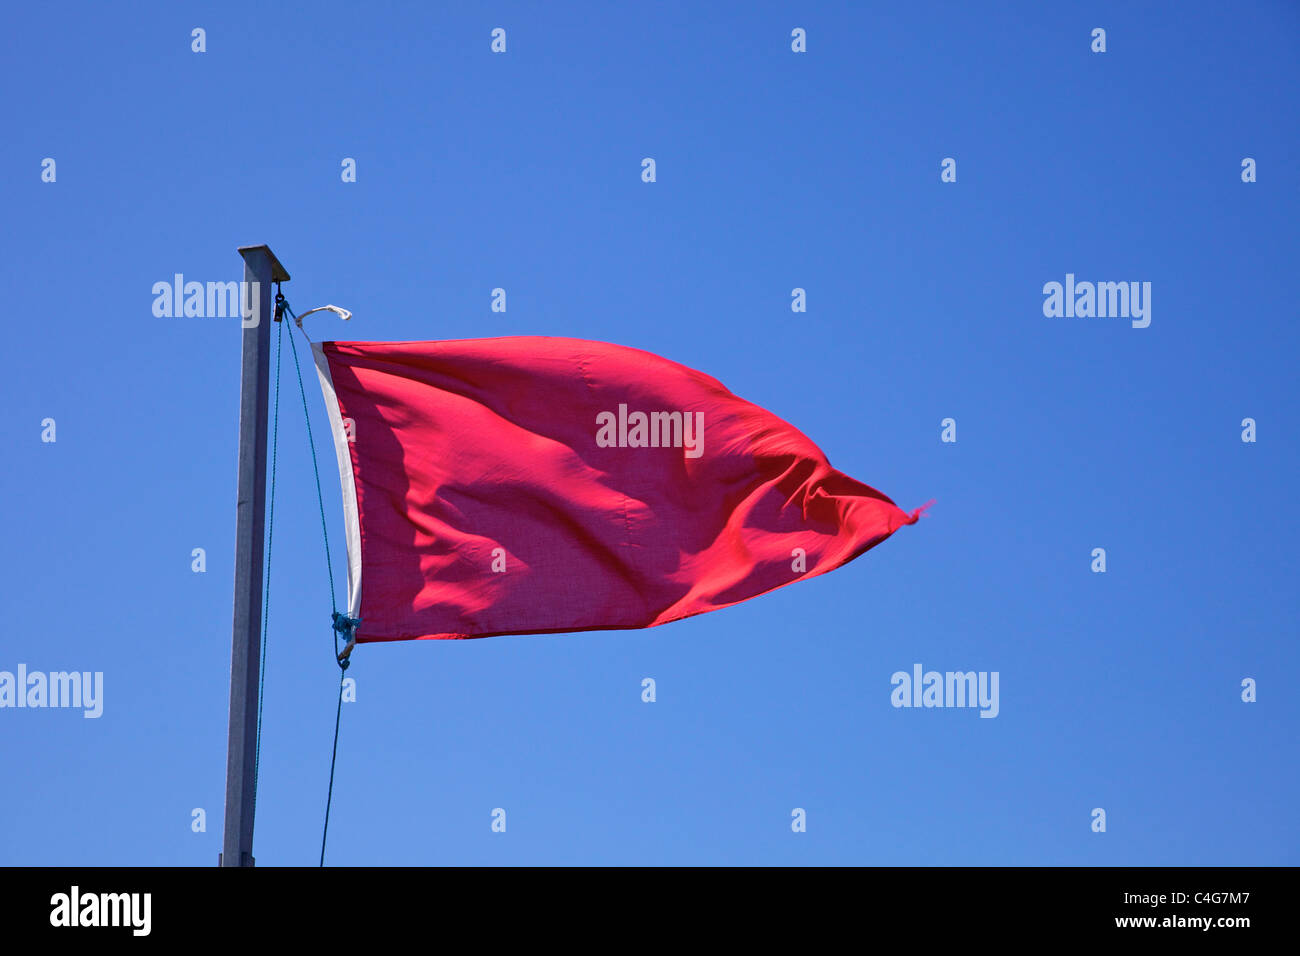 Red flag waving against blue sky Stock Photo